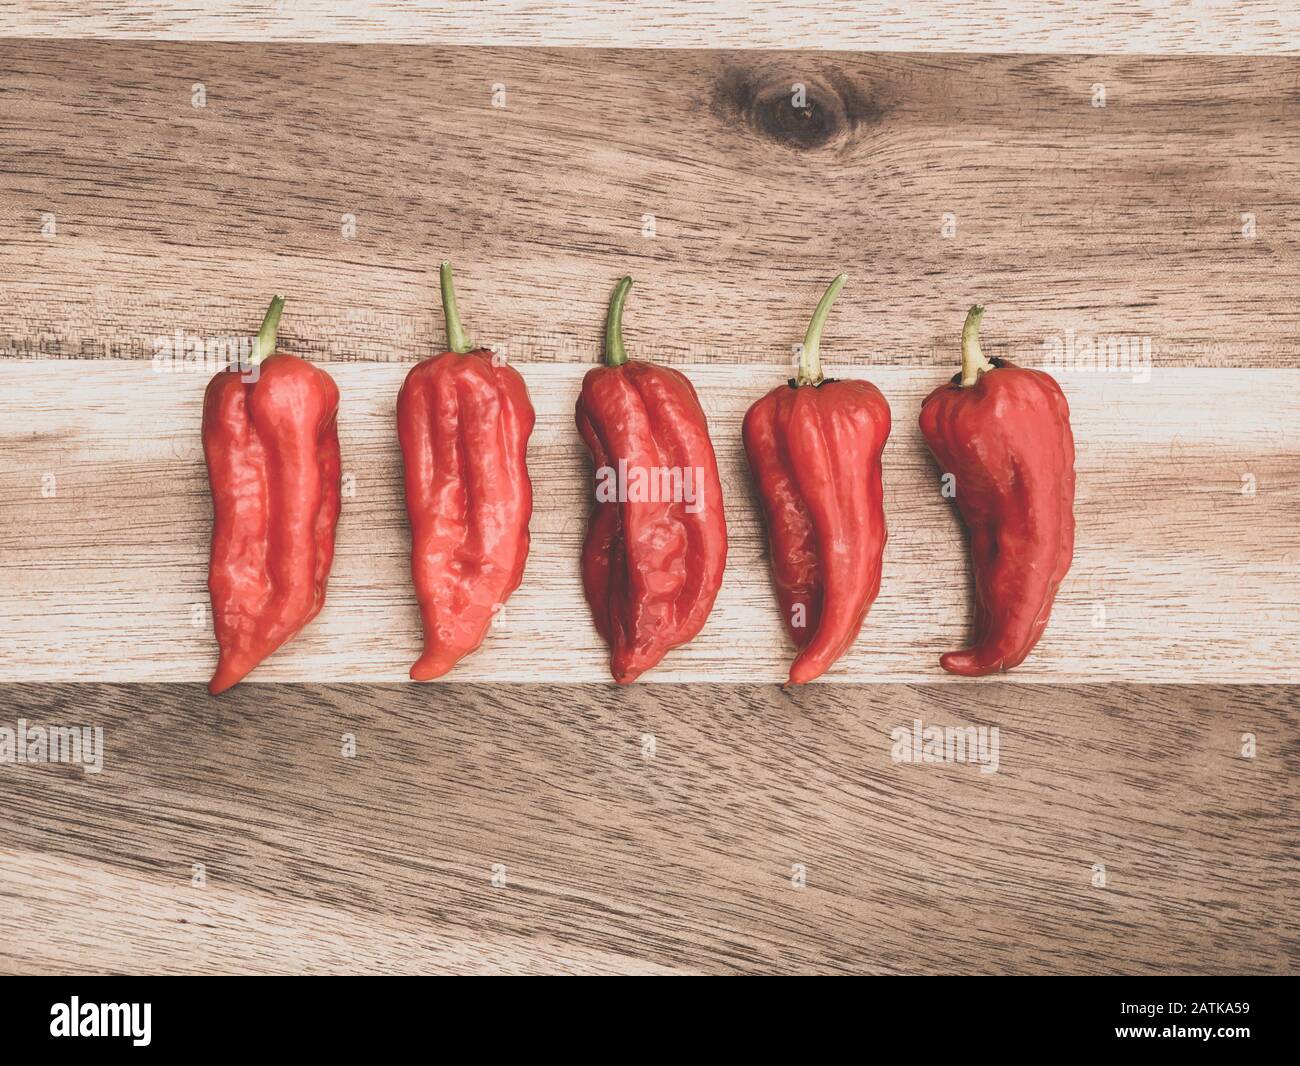 Decoration of chili peppers on wodden board. Five Bhut jolokia on wooden background Stock Photo